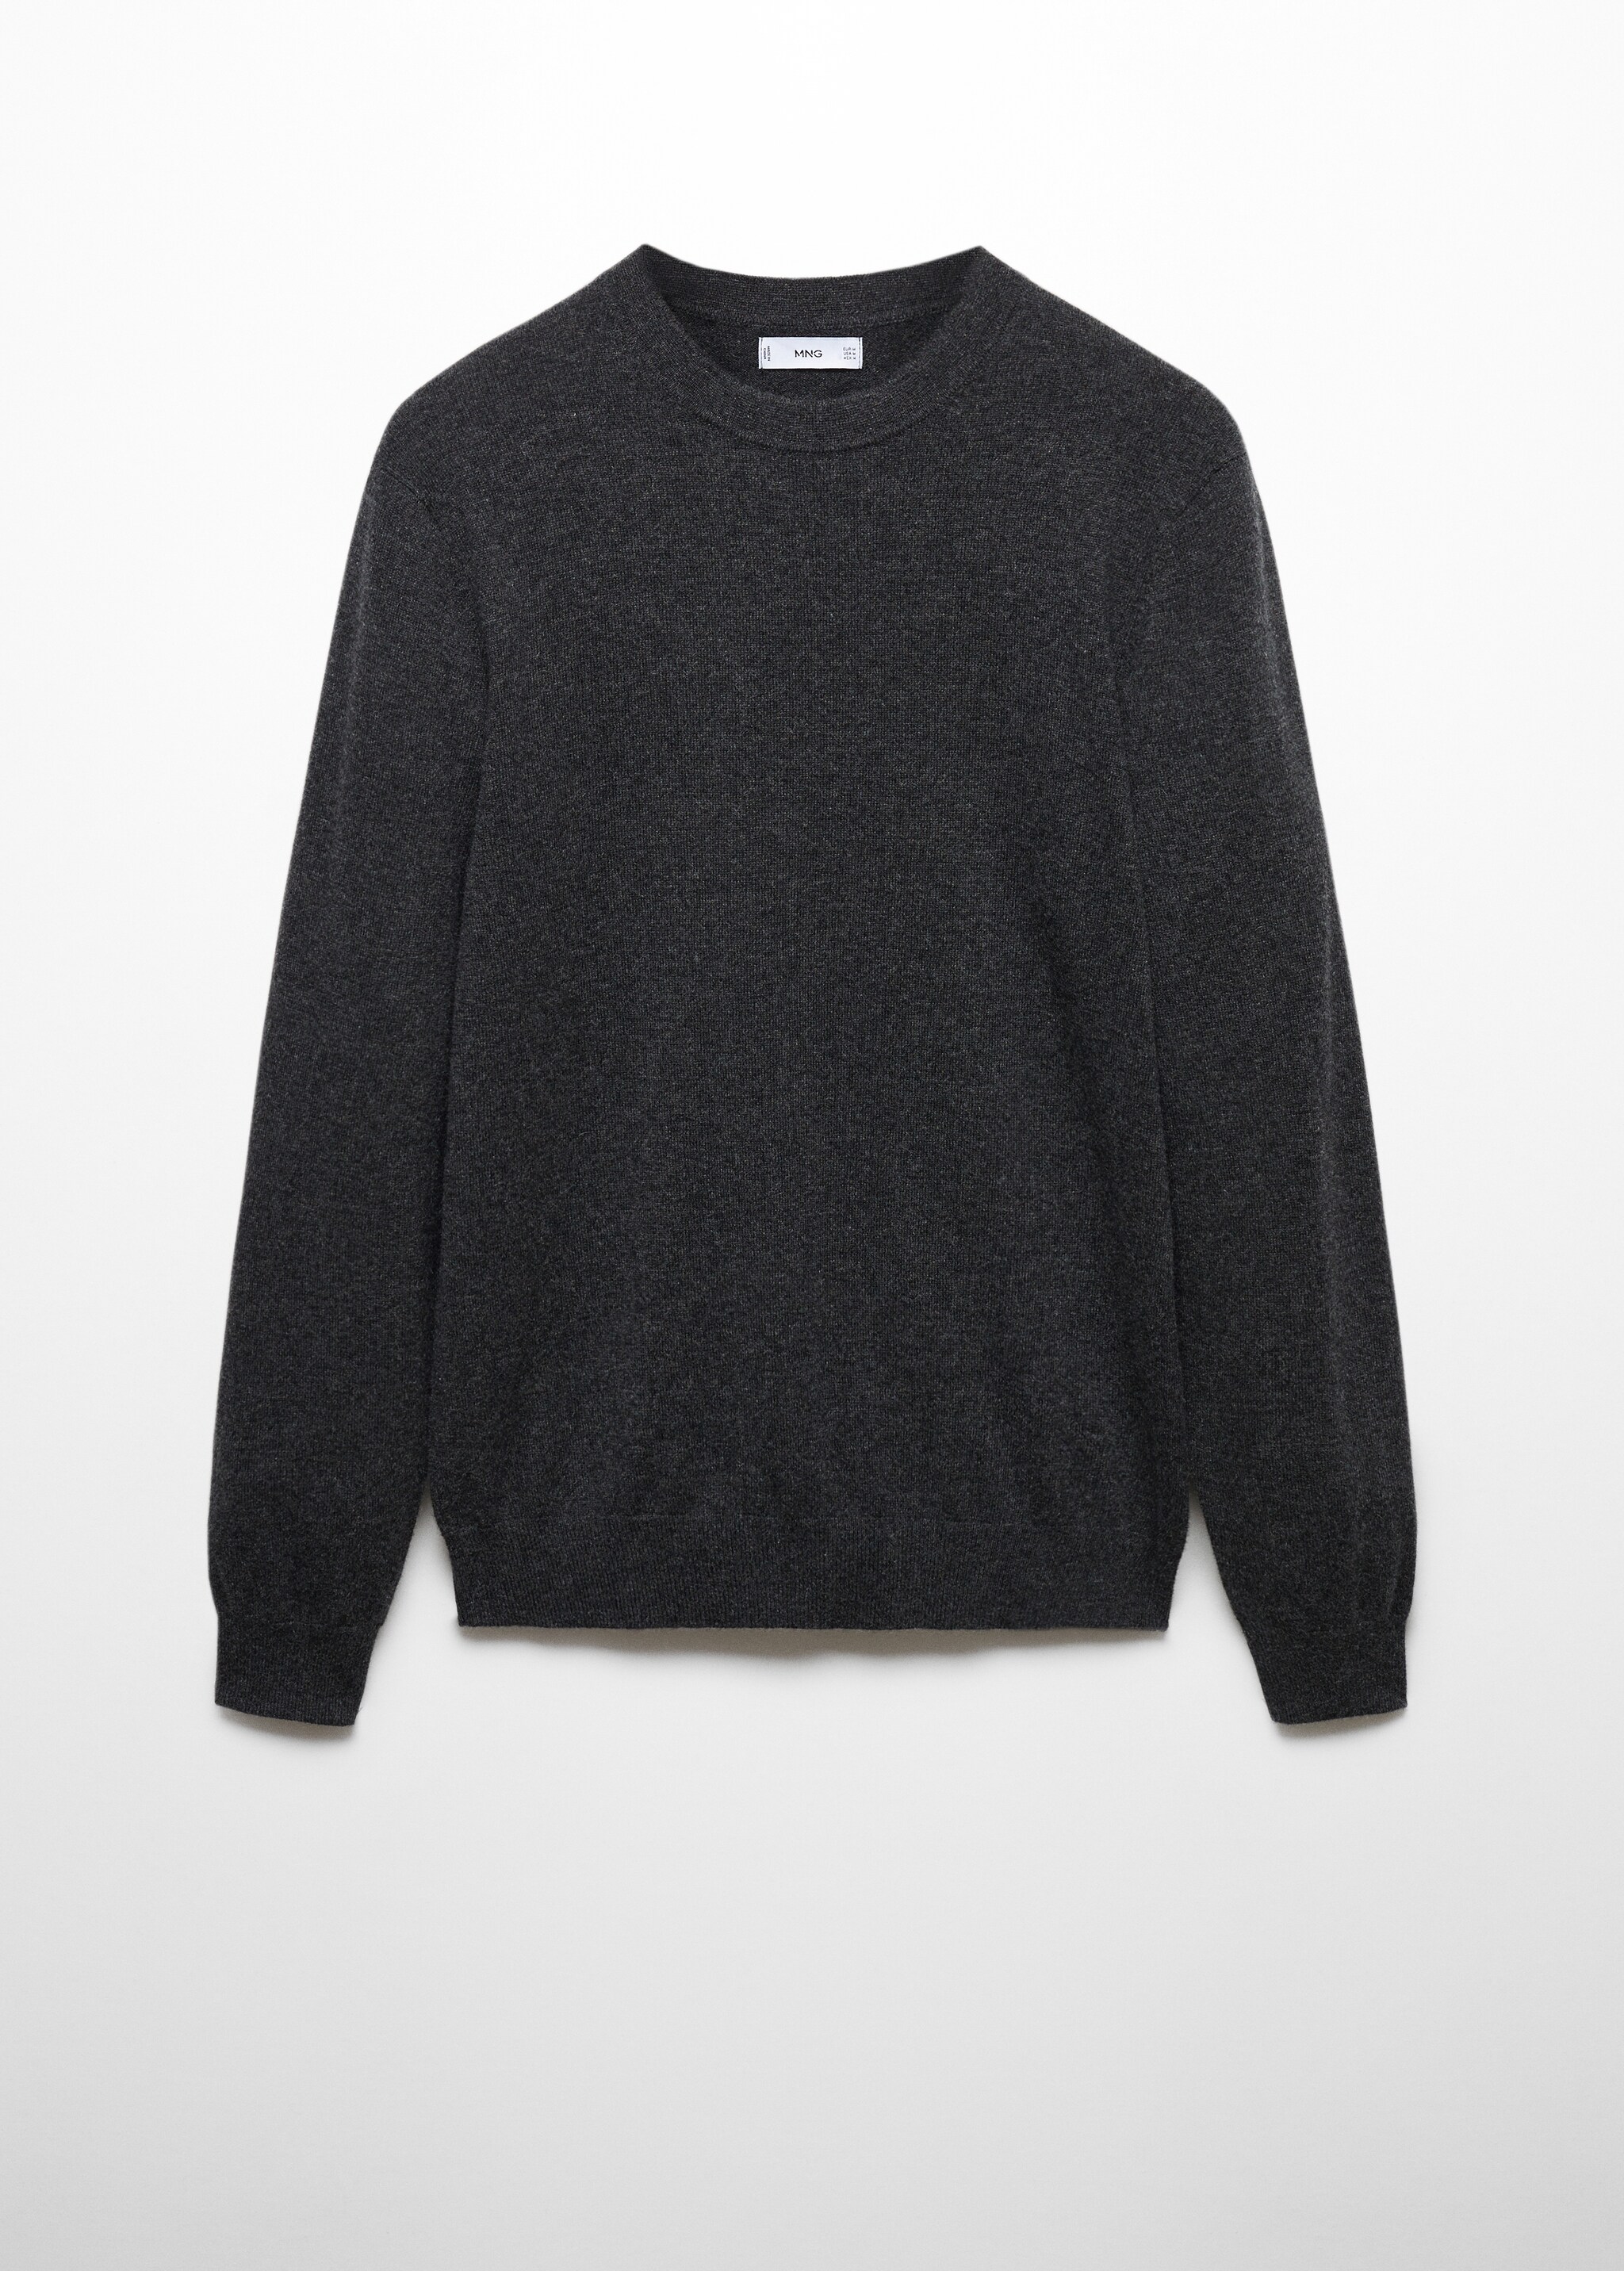 100% cashmere sweater - Article without model